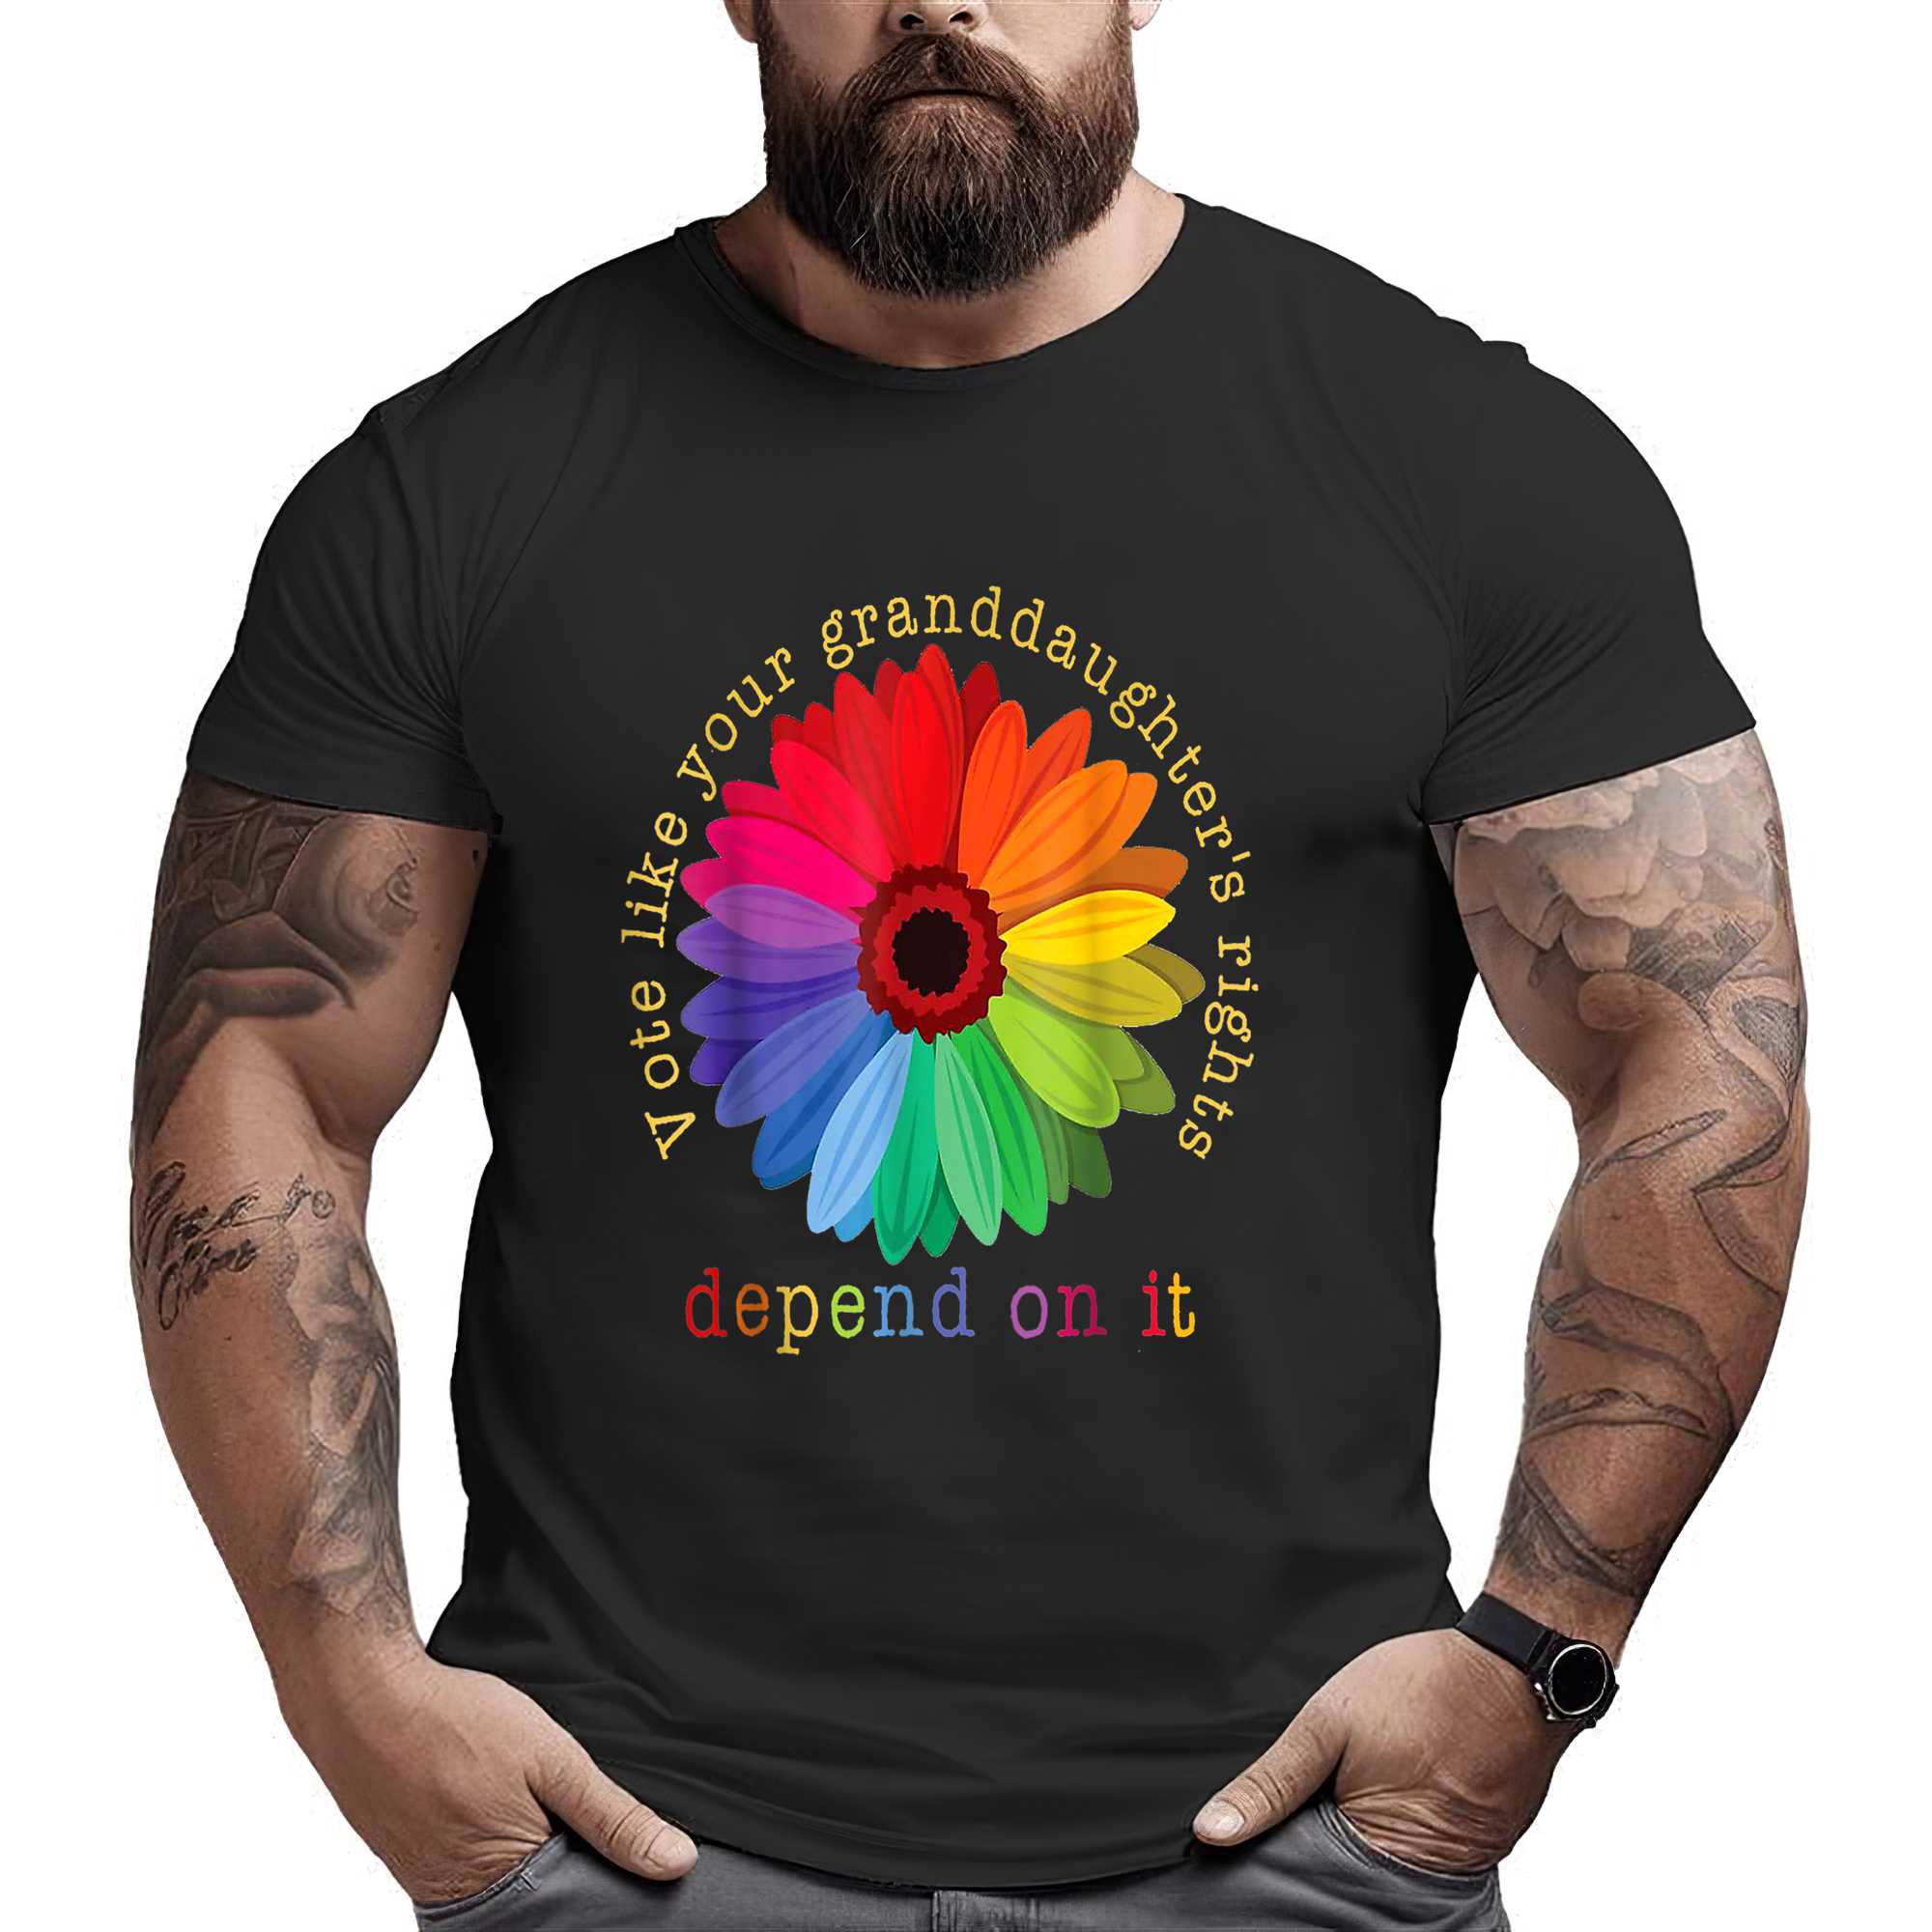 Vote Like Your Granddaughter’s Rights Depend On It T-shirt